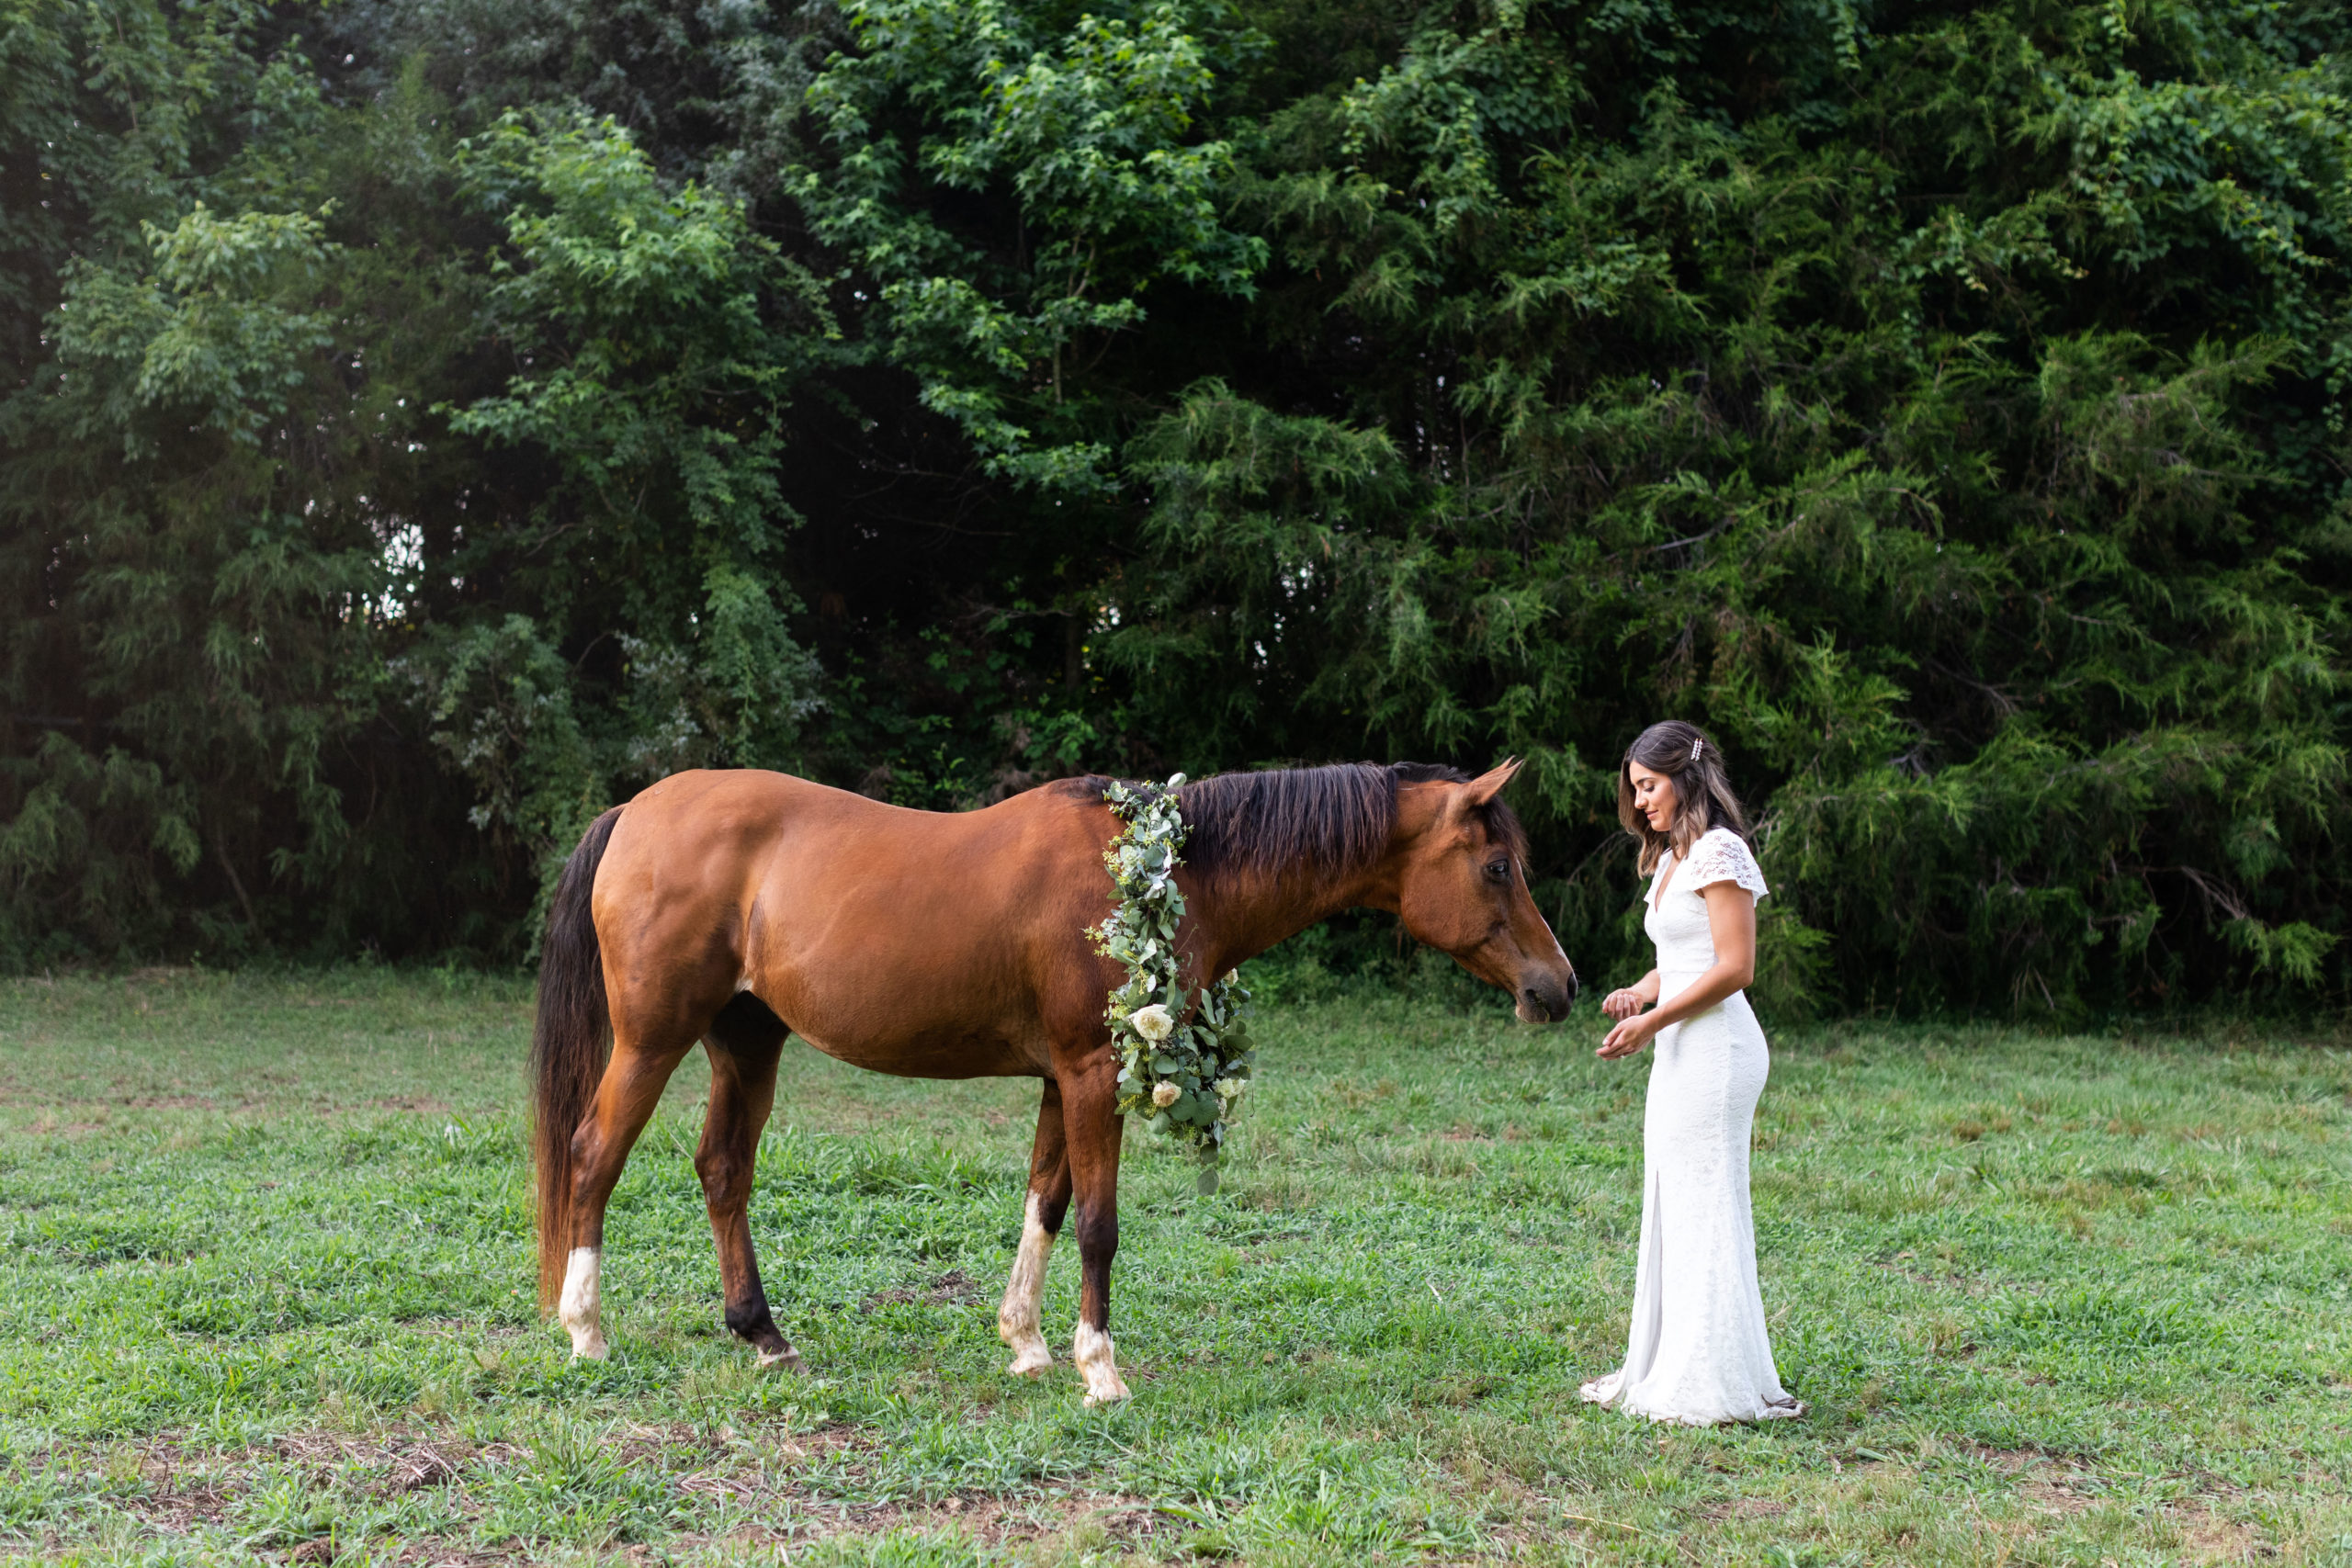 3 Tips For Including Your Horse in Your Engagement or Bridal Session